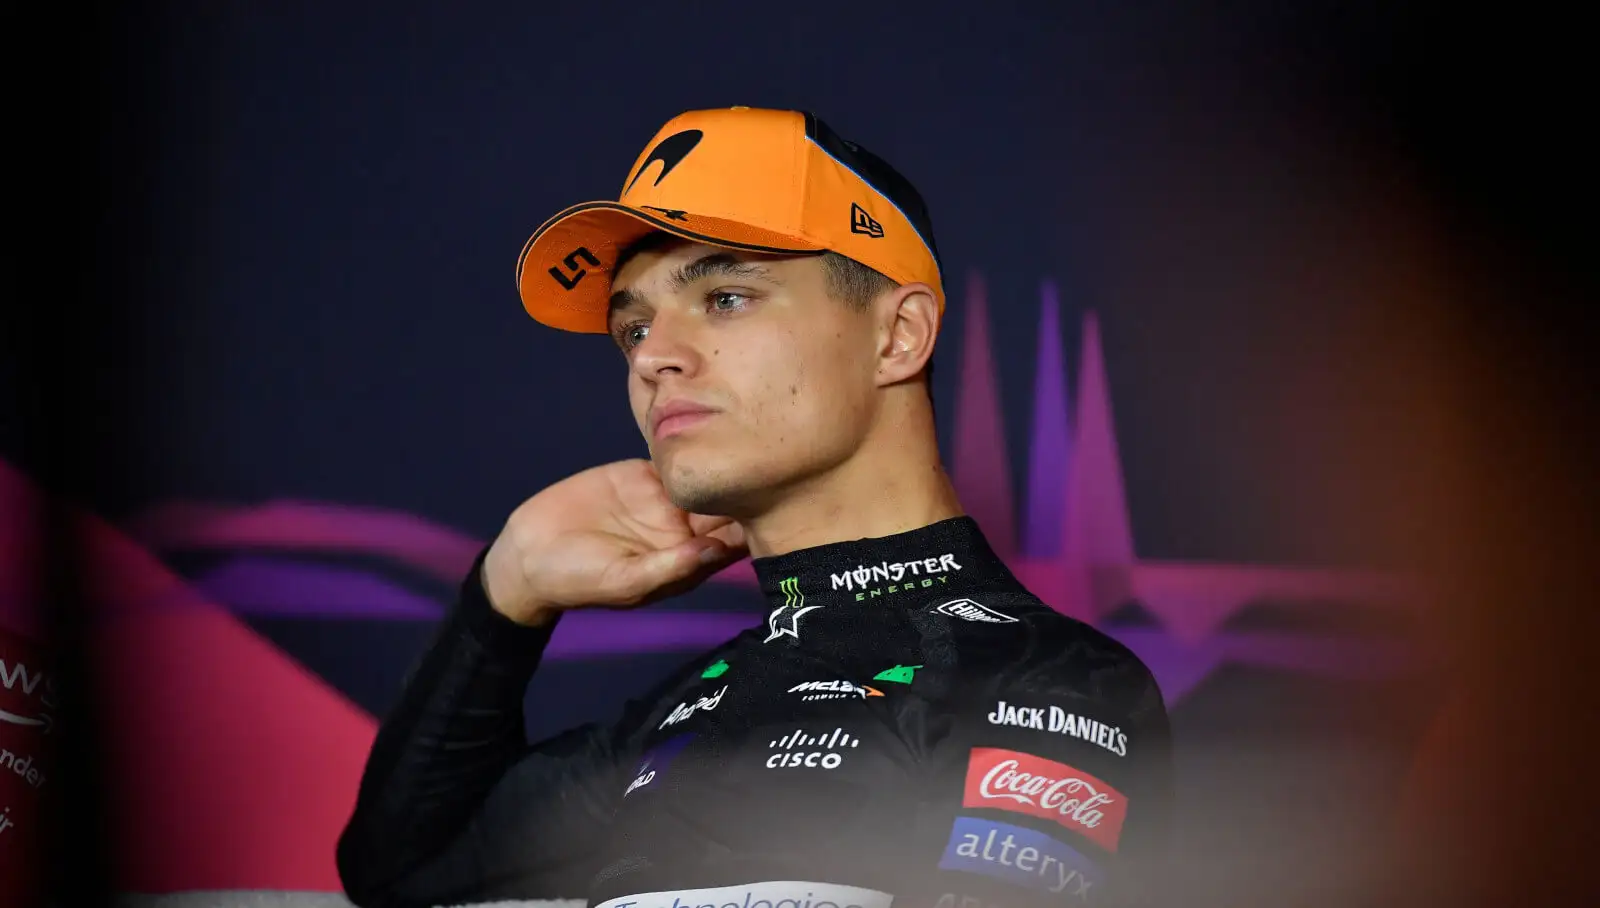 Lando Norris wants McLaren discussion after openly questioning early Japan GP pit stop